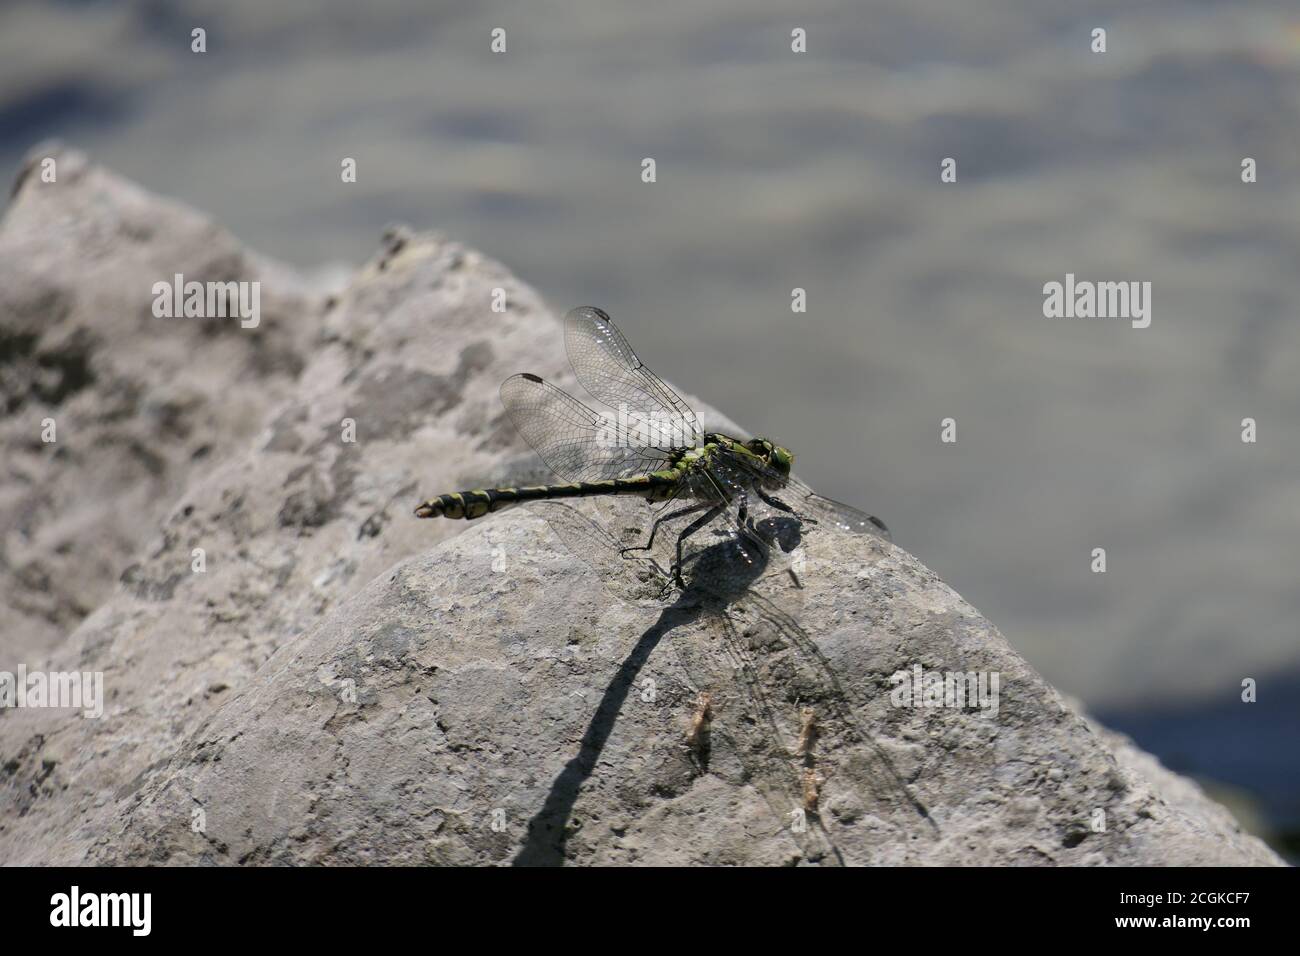 Closeup dragonfly or damselfly on a stone at a river Stock Photo